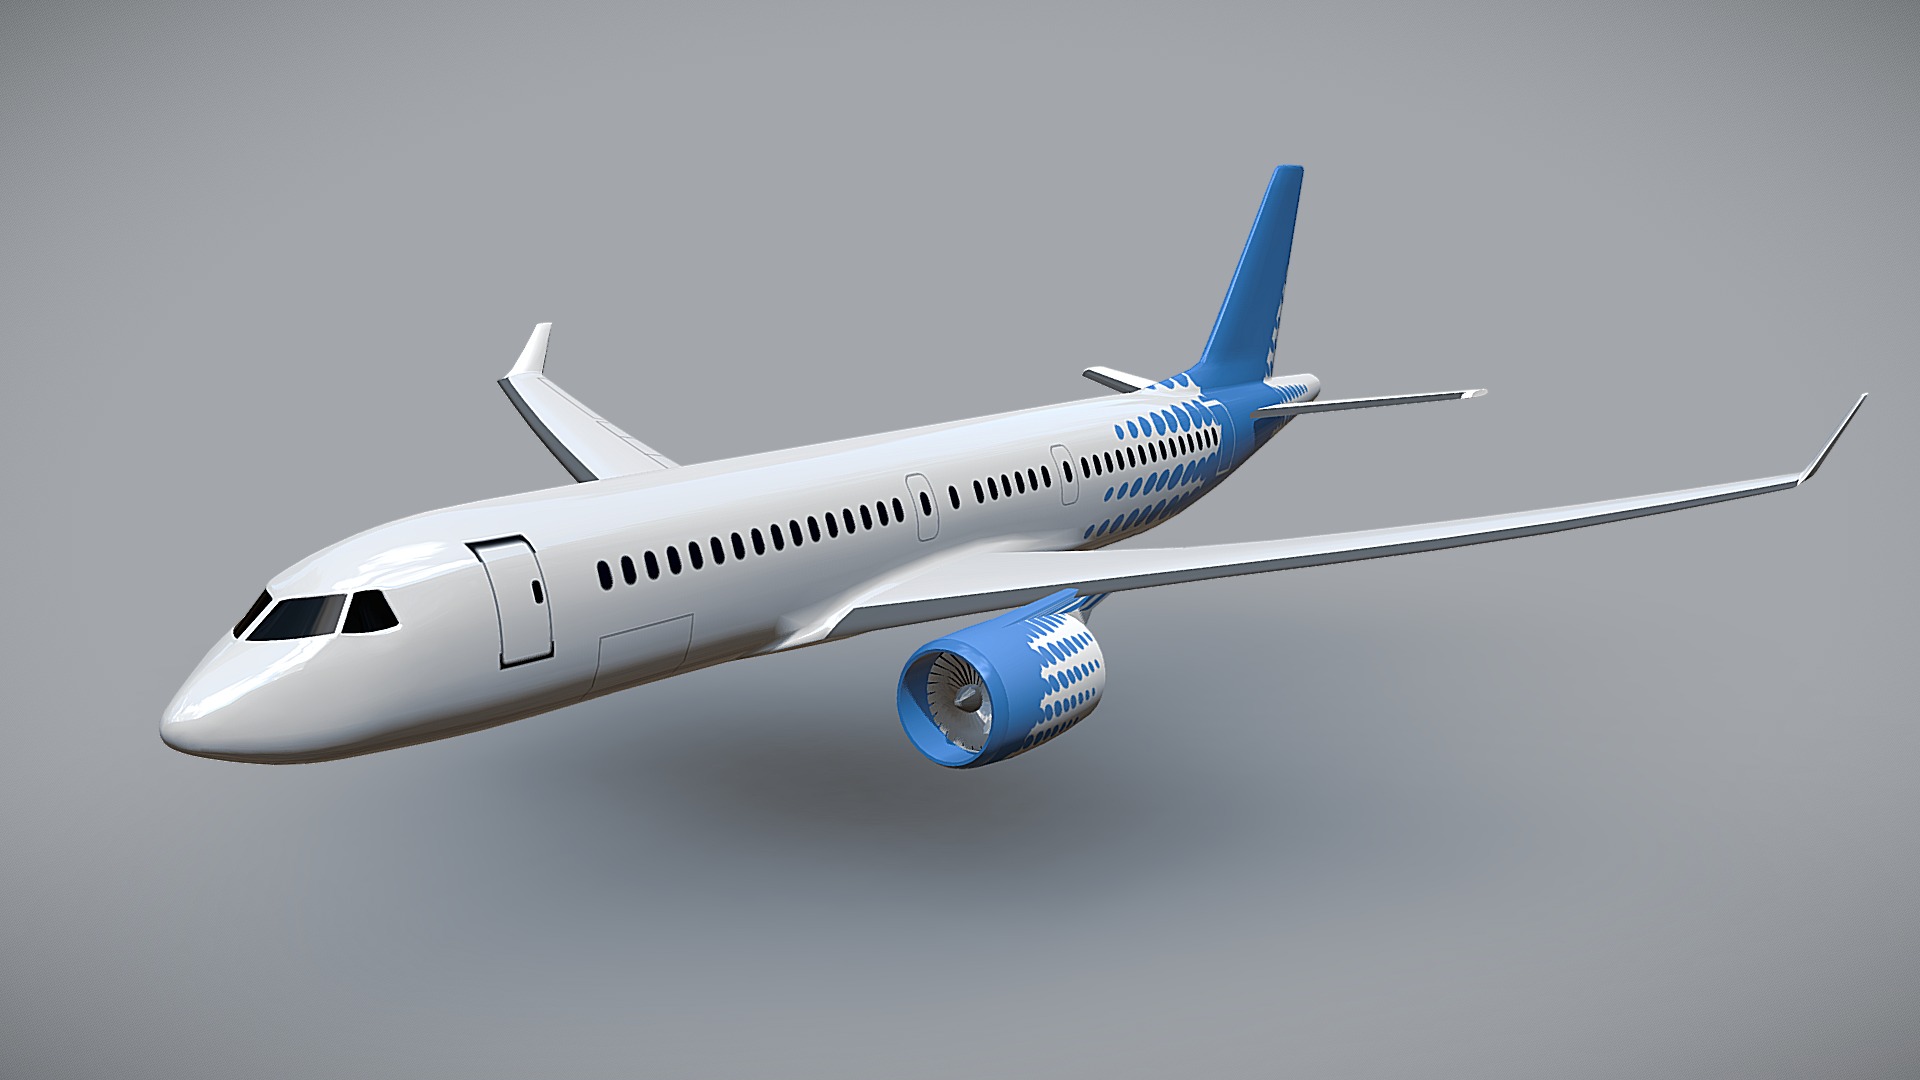 3D model Bombardier CS-300 jetliner - This is a 3D model of the Bombardier CS-300 jetliner. The 3D model is about a white airplane in the sky.